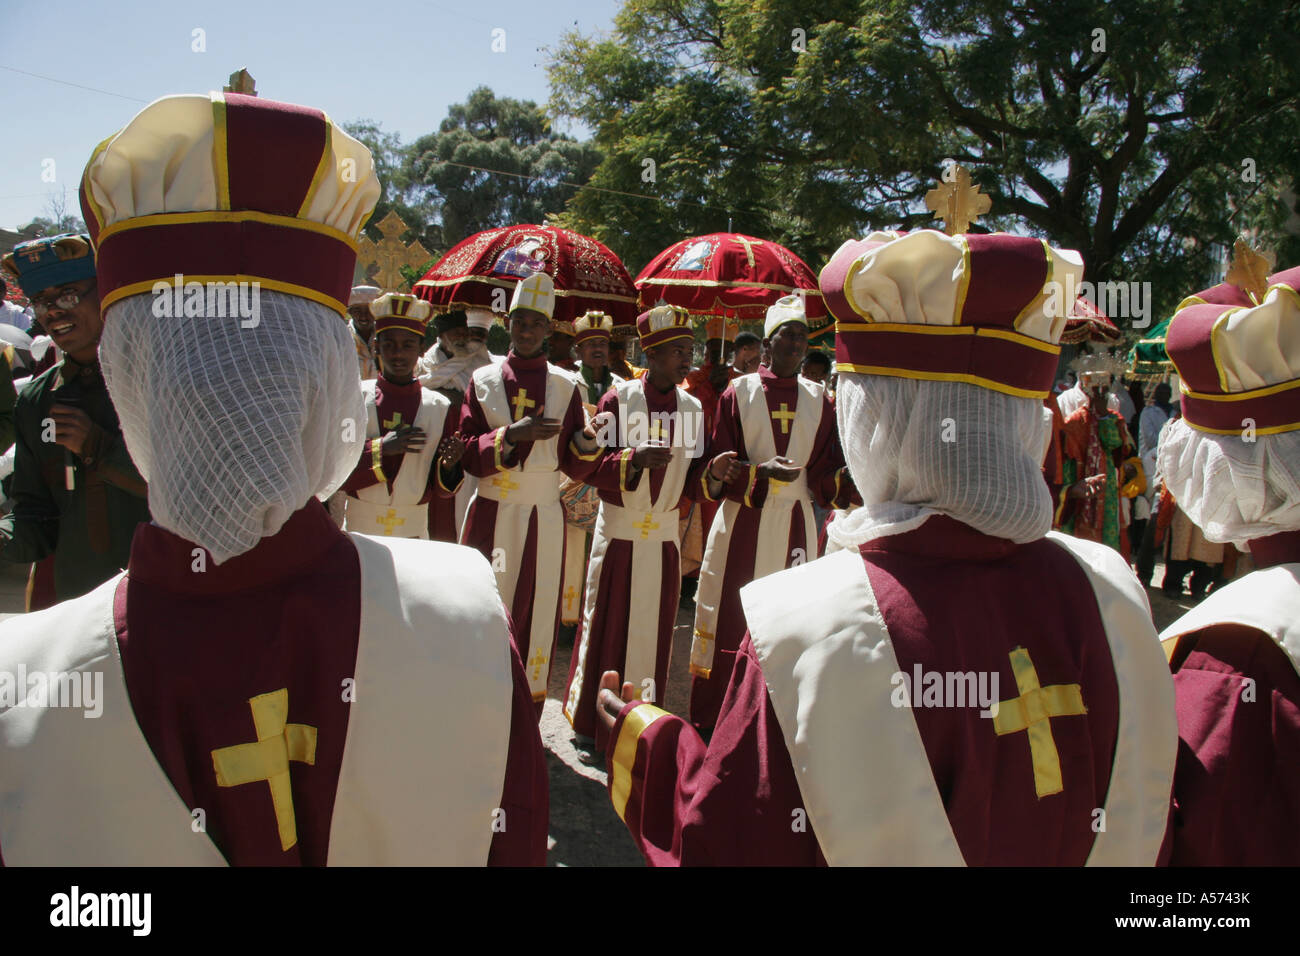 Painet jb1204 ethiopia dancing feast mary axum africa religion christianity orthodox coptic music dance cross country Stock Photo